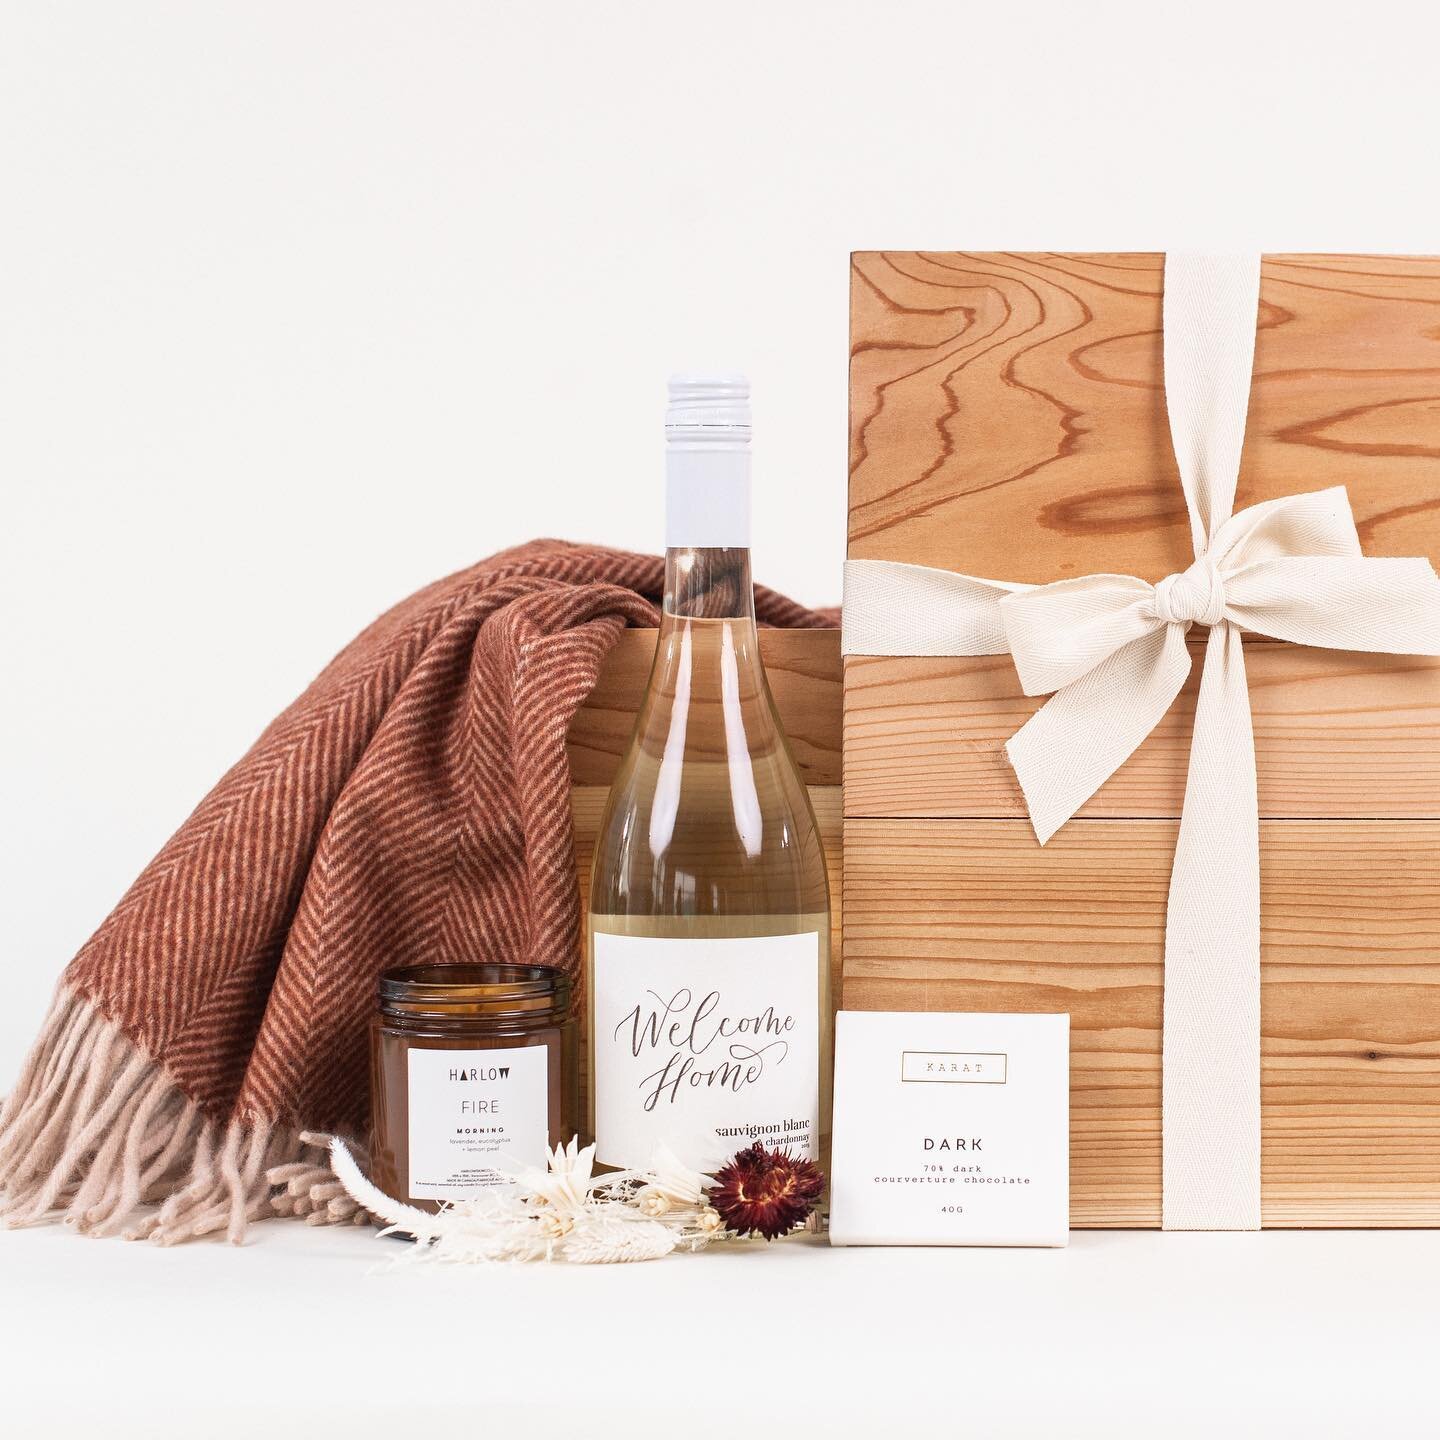 One of our fave styled product shots from our last shoot with @fromusgifting! The perfect housewarming gift box that supports all local small businesses! 💛 @essellco @harlowskinco @karatchocolate 

Are you ready to level up your online marketing gam